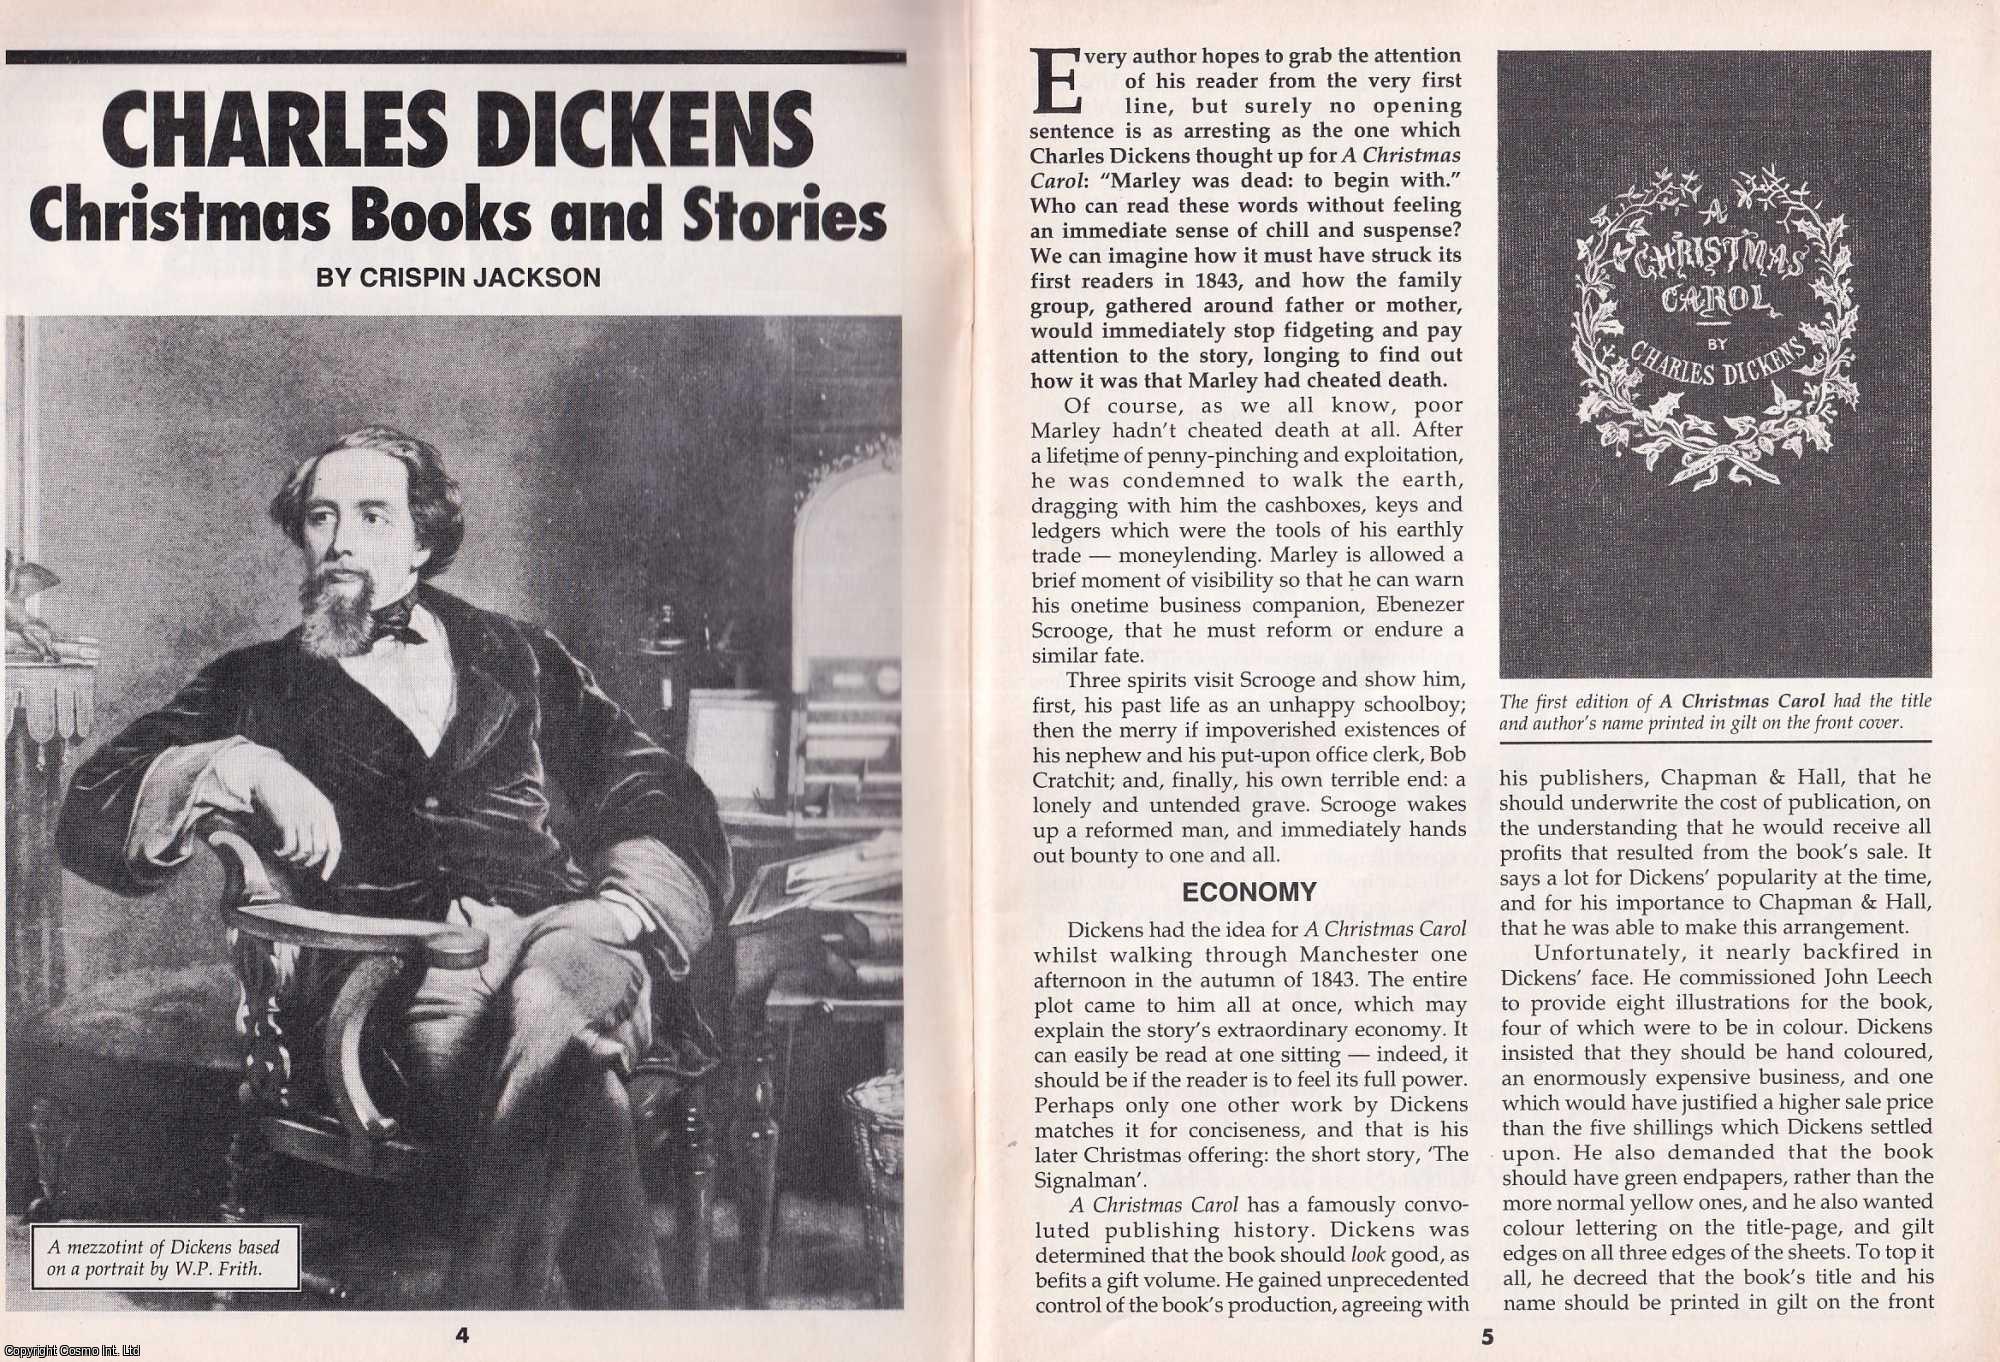 Crispin Jackson - Charles Dickens. Christmas Books and Stories. This is an original article separated from an issue of The Book & Magazine Collector publication.